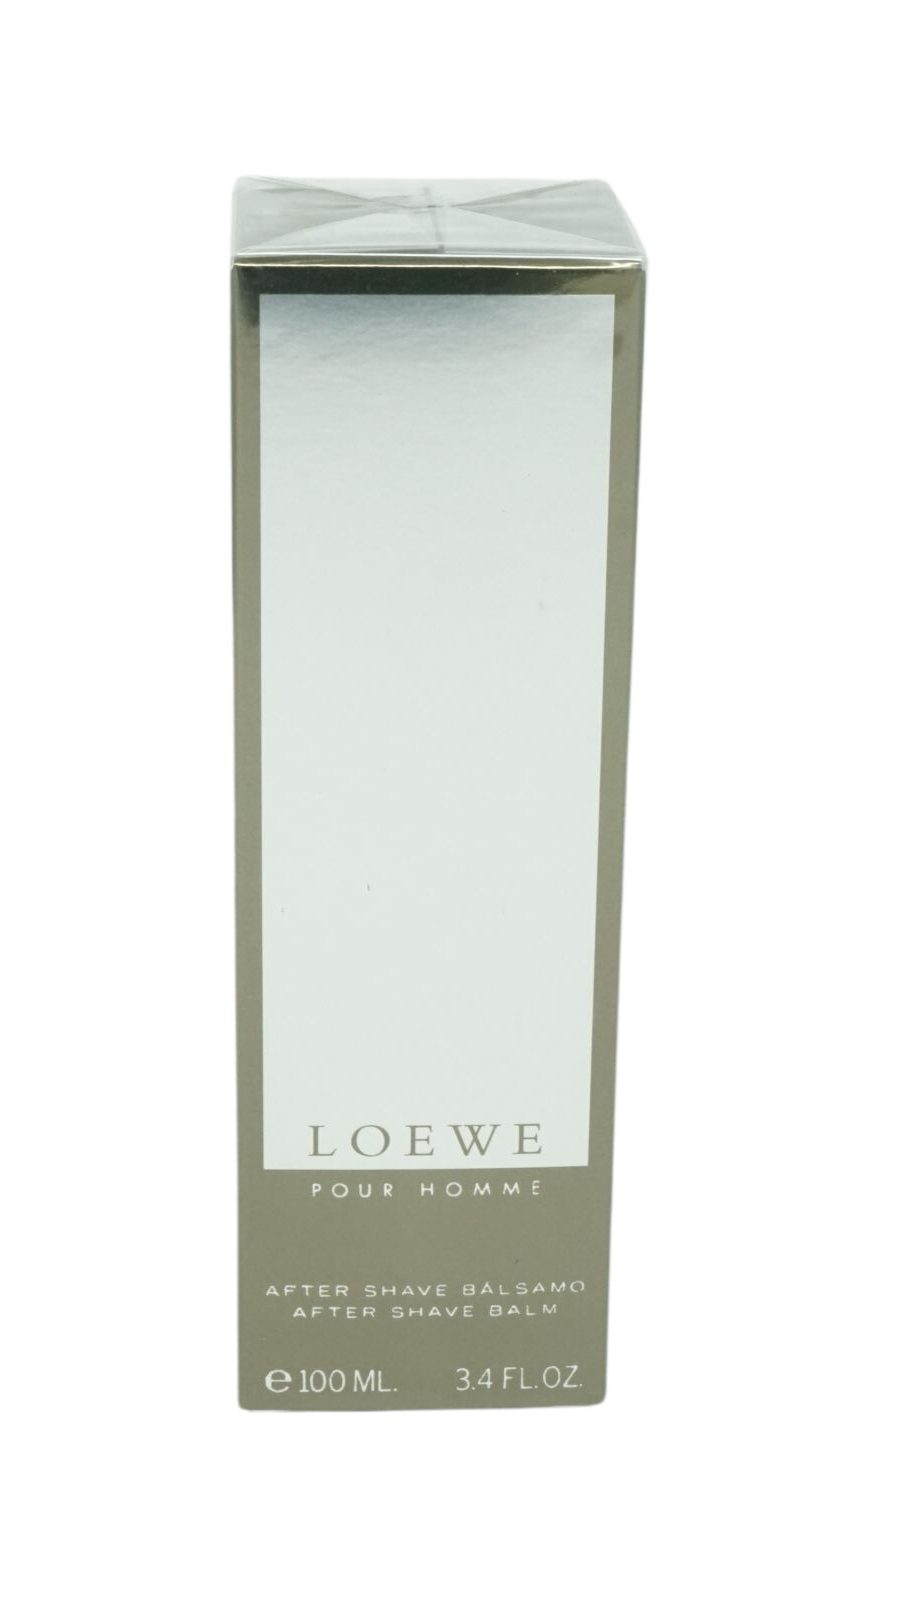 Loewe After-Shave Balsam Loewe Pour Homme After Shave Balm 100ml